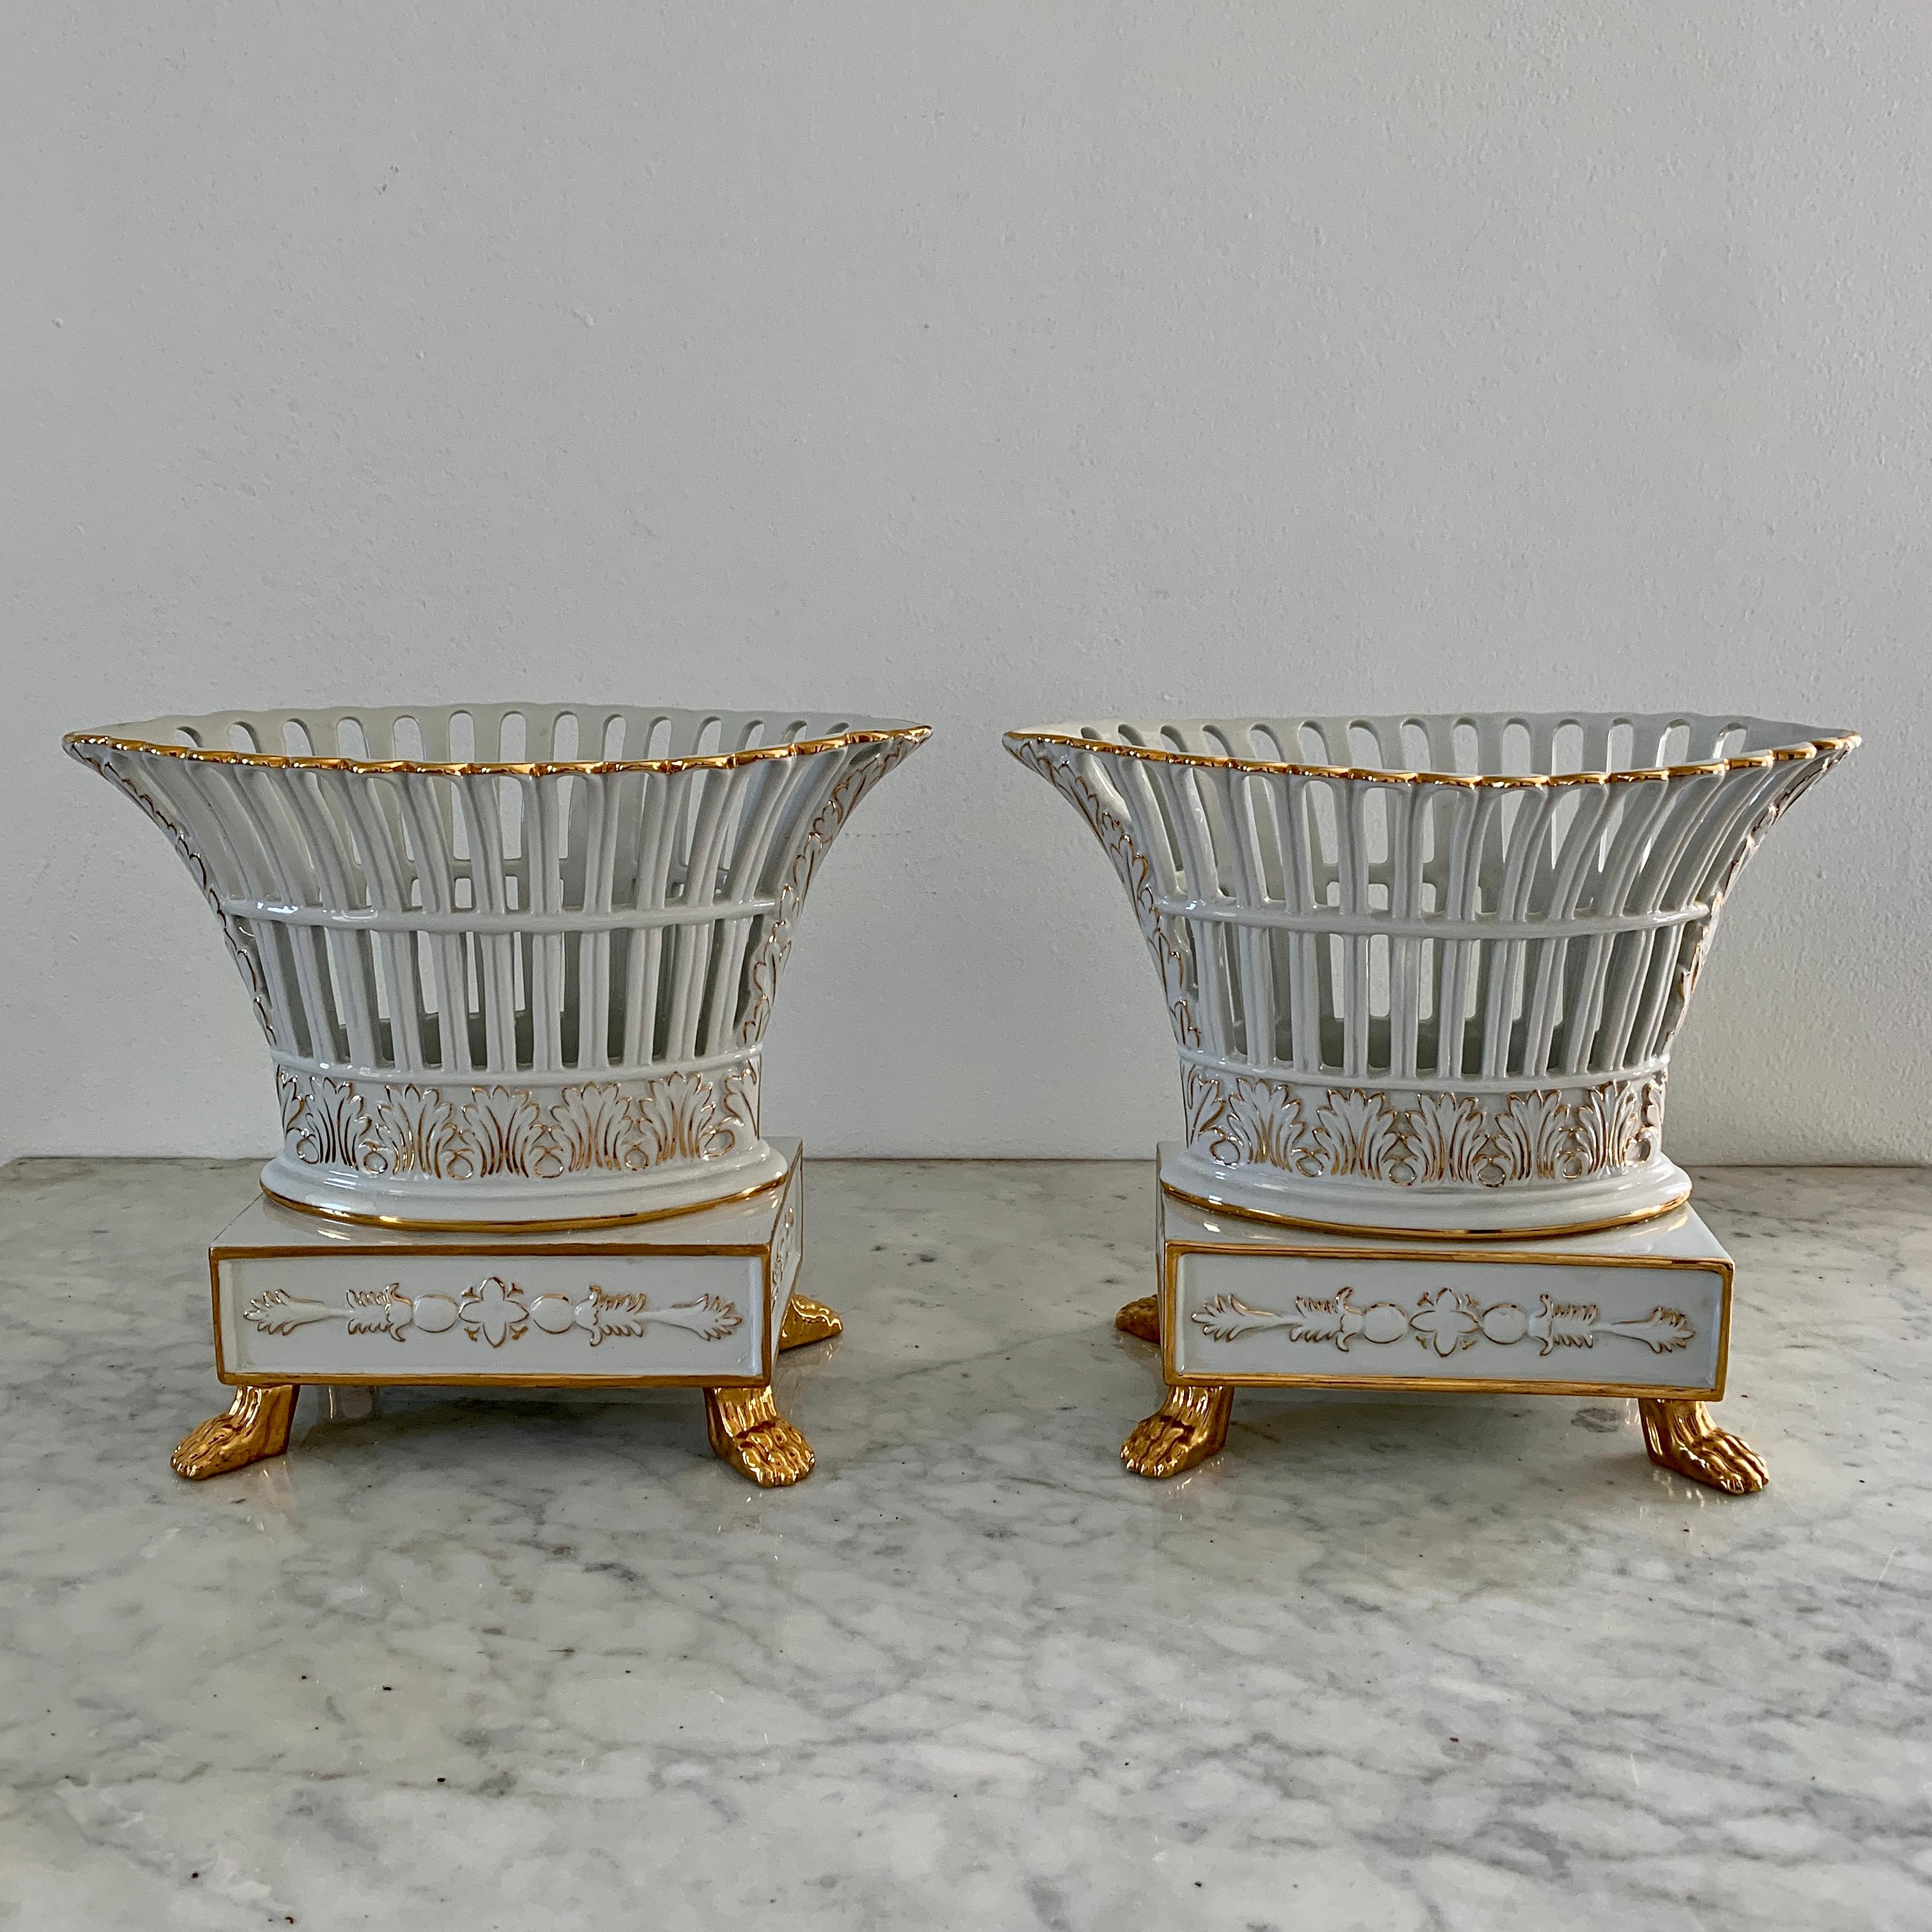 Neoclassical Regency Reticulated Gold Gilt Porcelain Basket Compotes, Pair For Sale 7